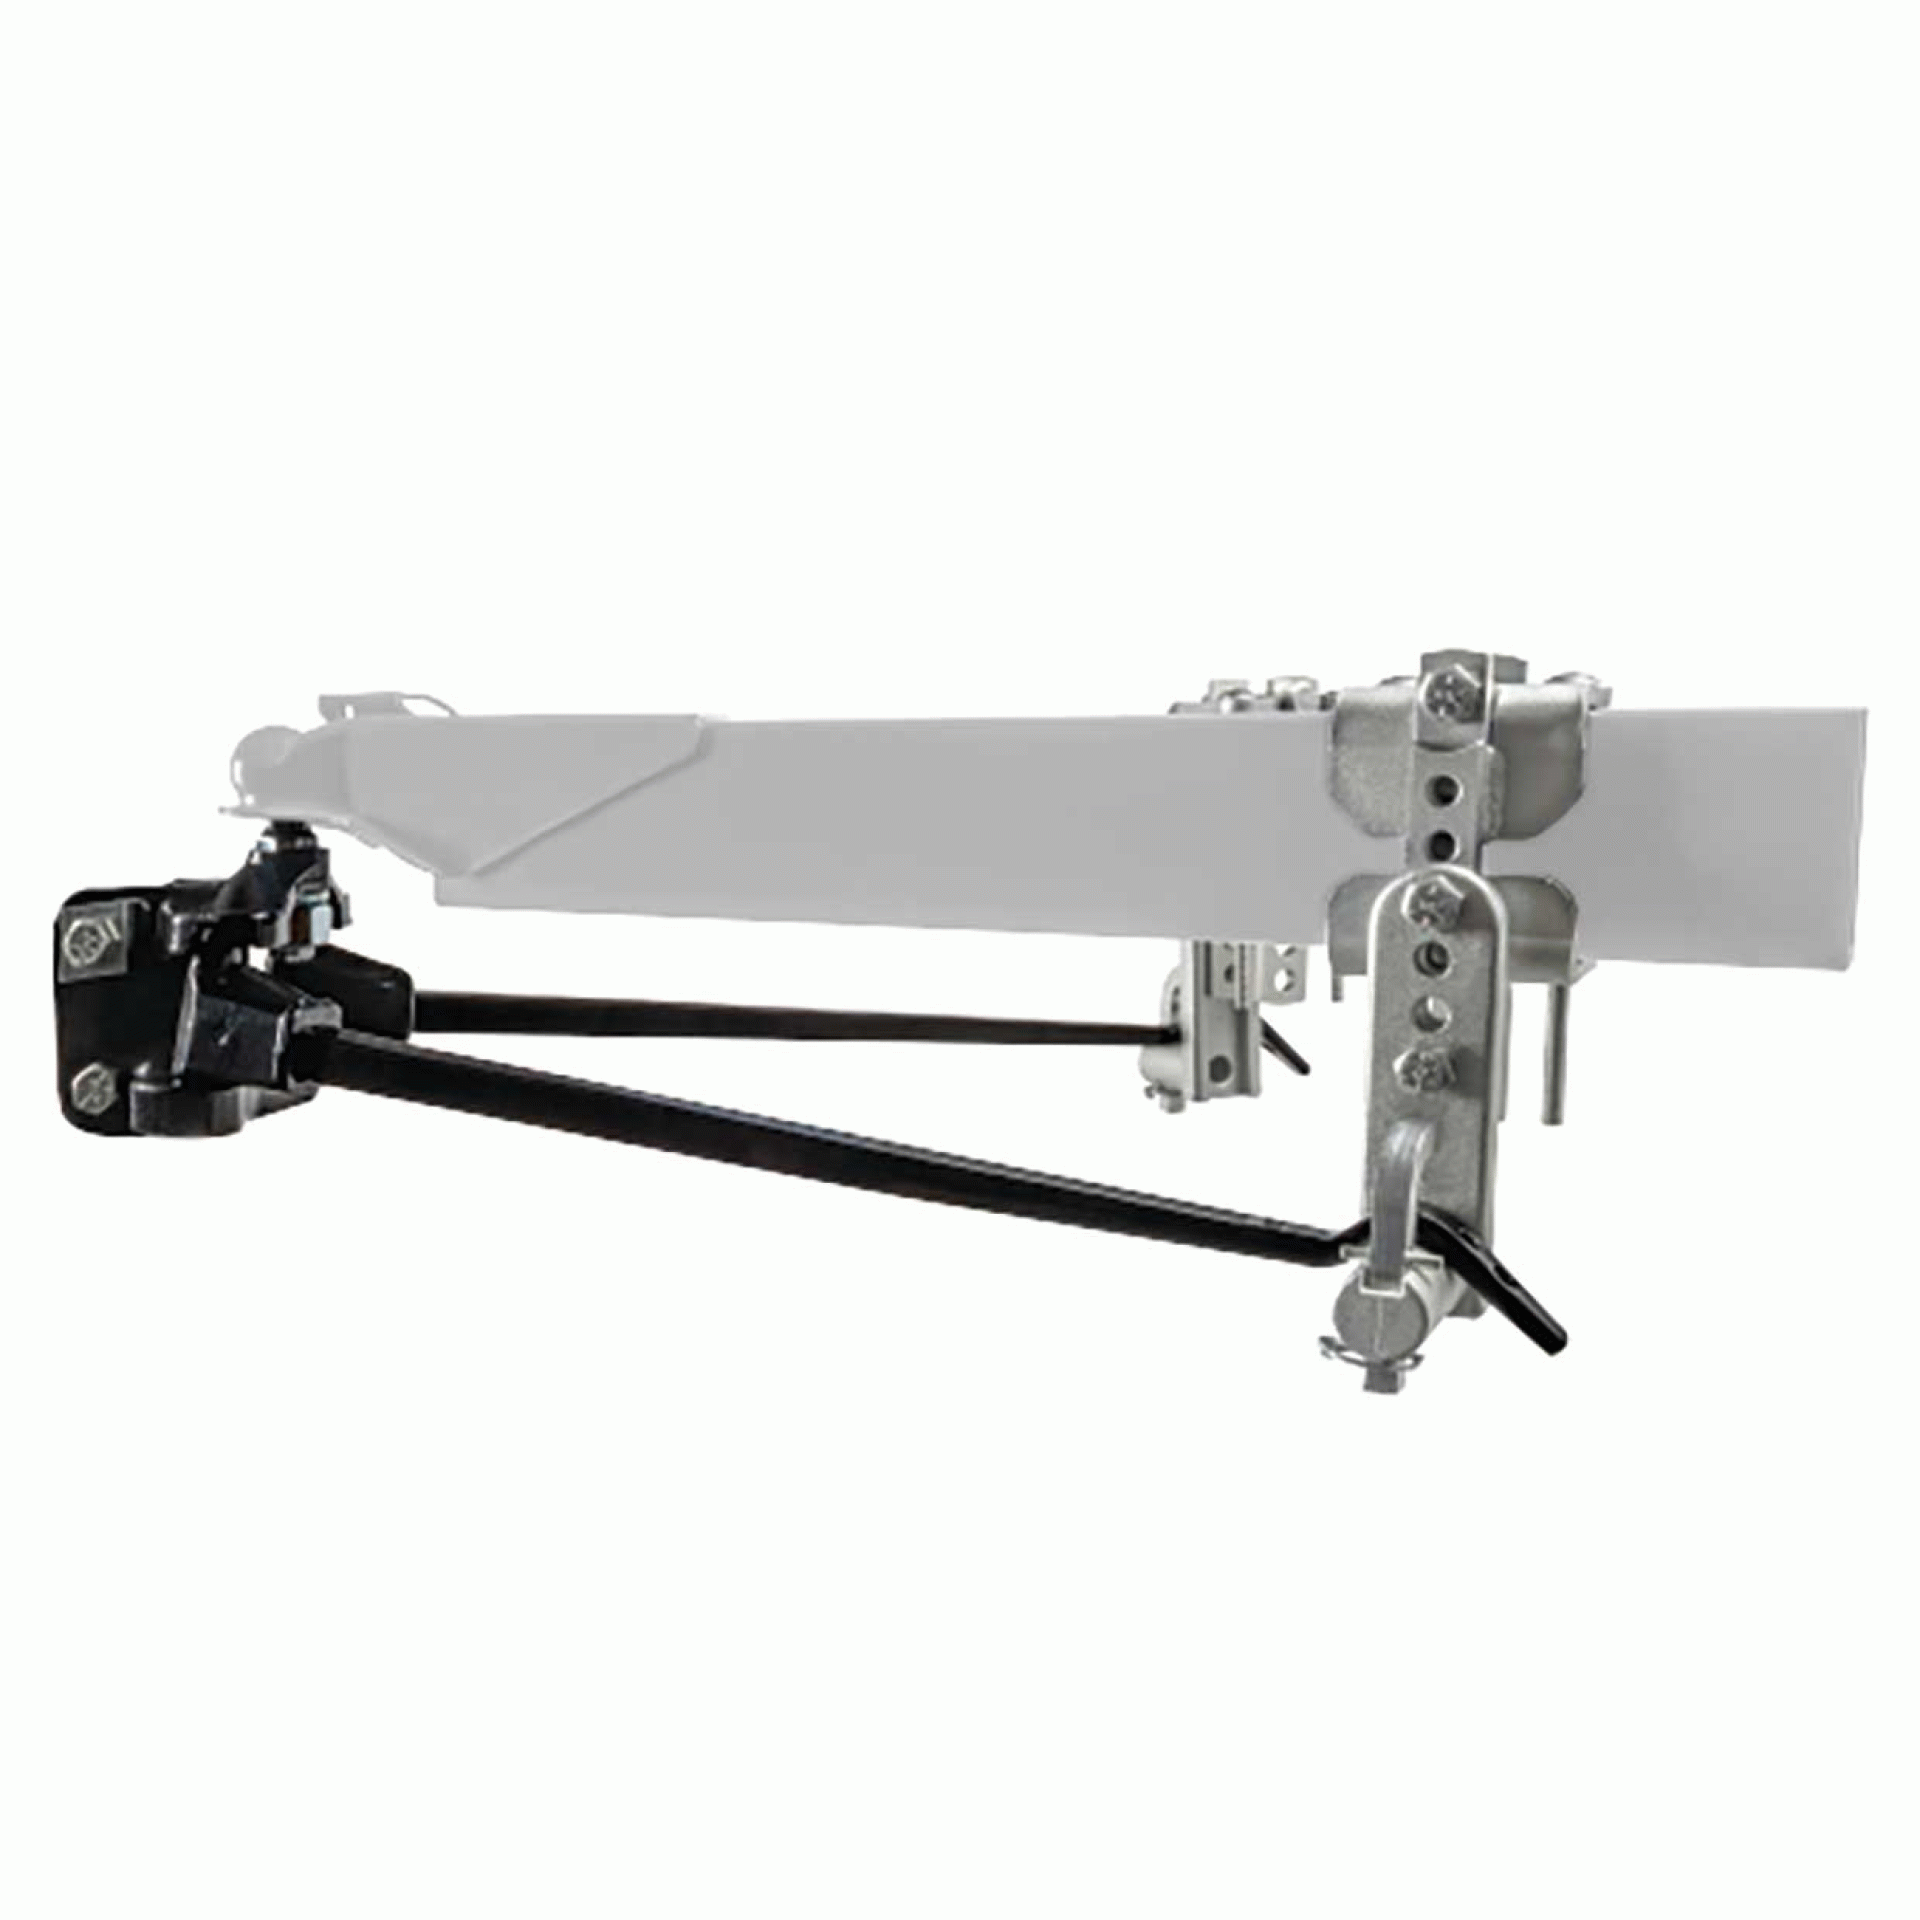 REESE | 66093 | Hitch Weight Distribution w/Active Sway Control 12 000 lb